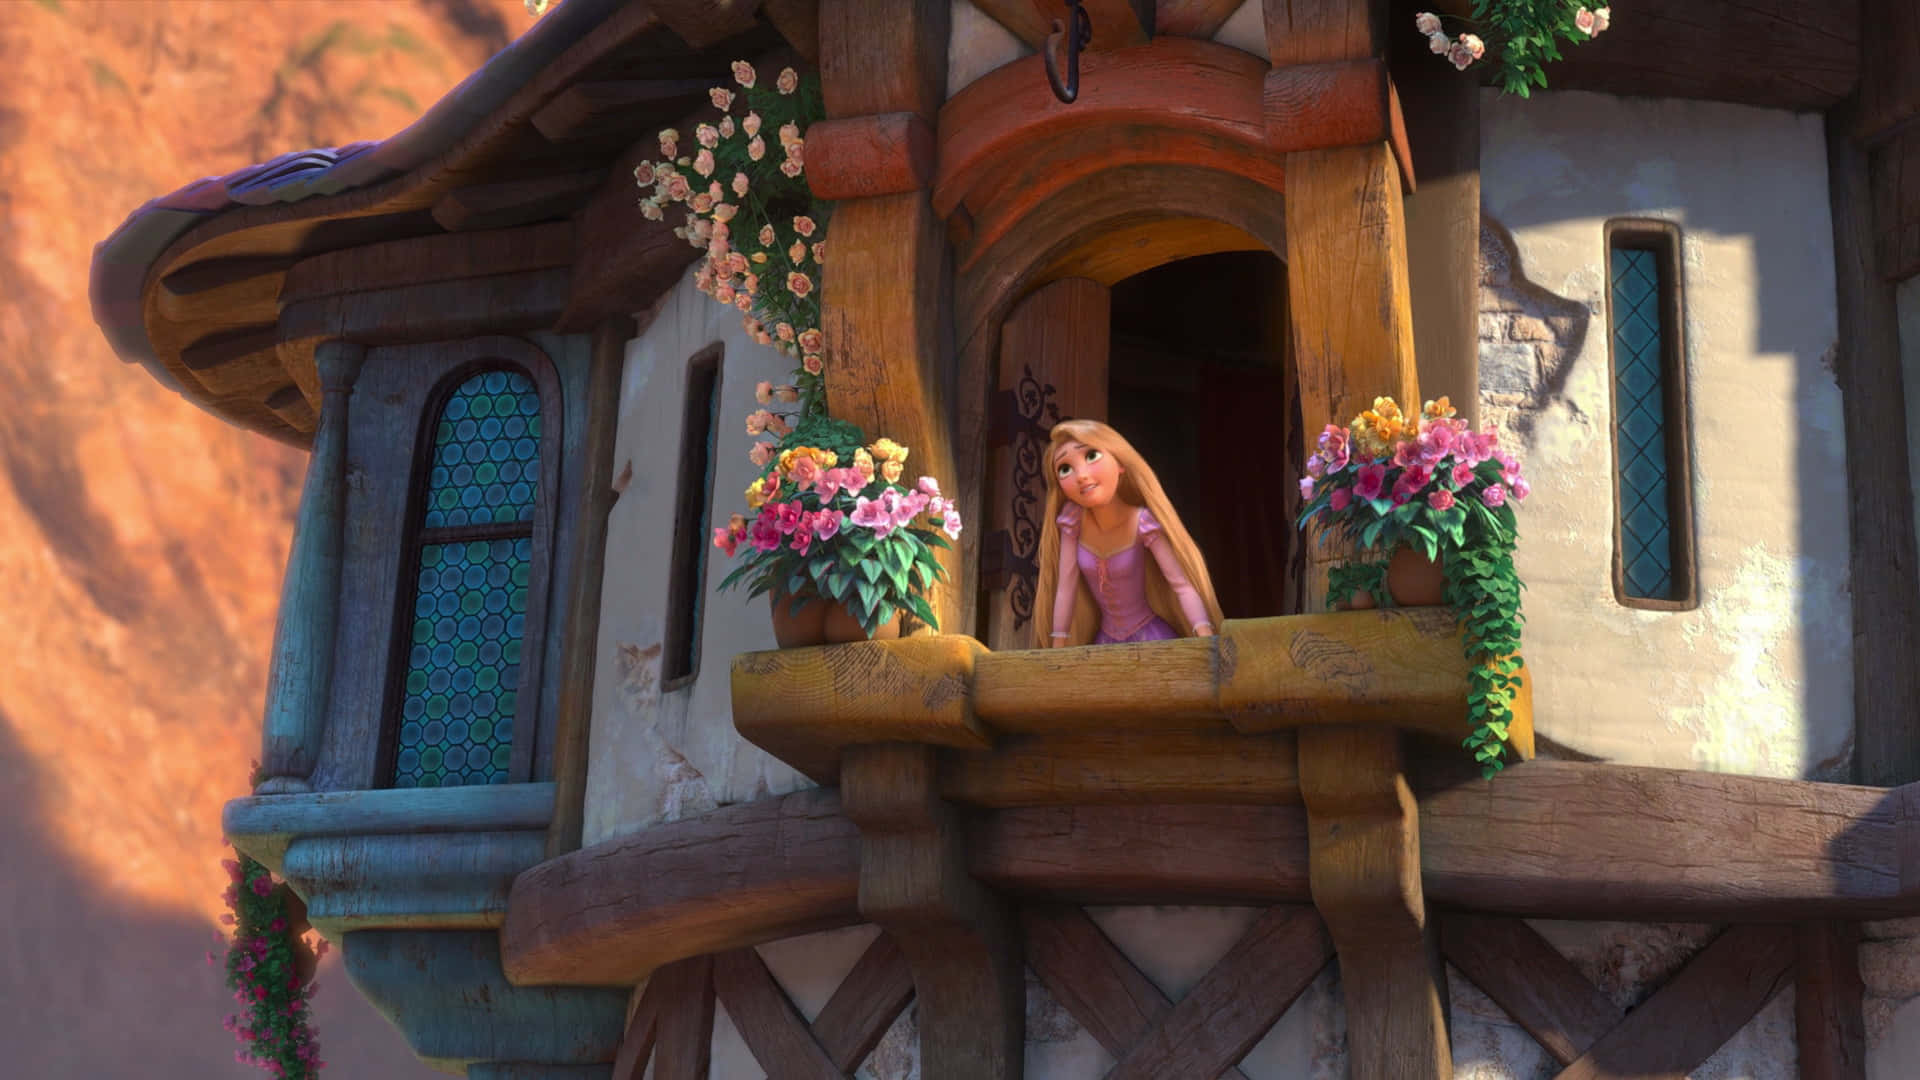 Enchanting Image Of The Timeless Disney Princess, Rapunzel, With Her Magical, Golden Locks.